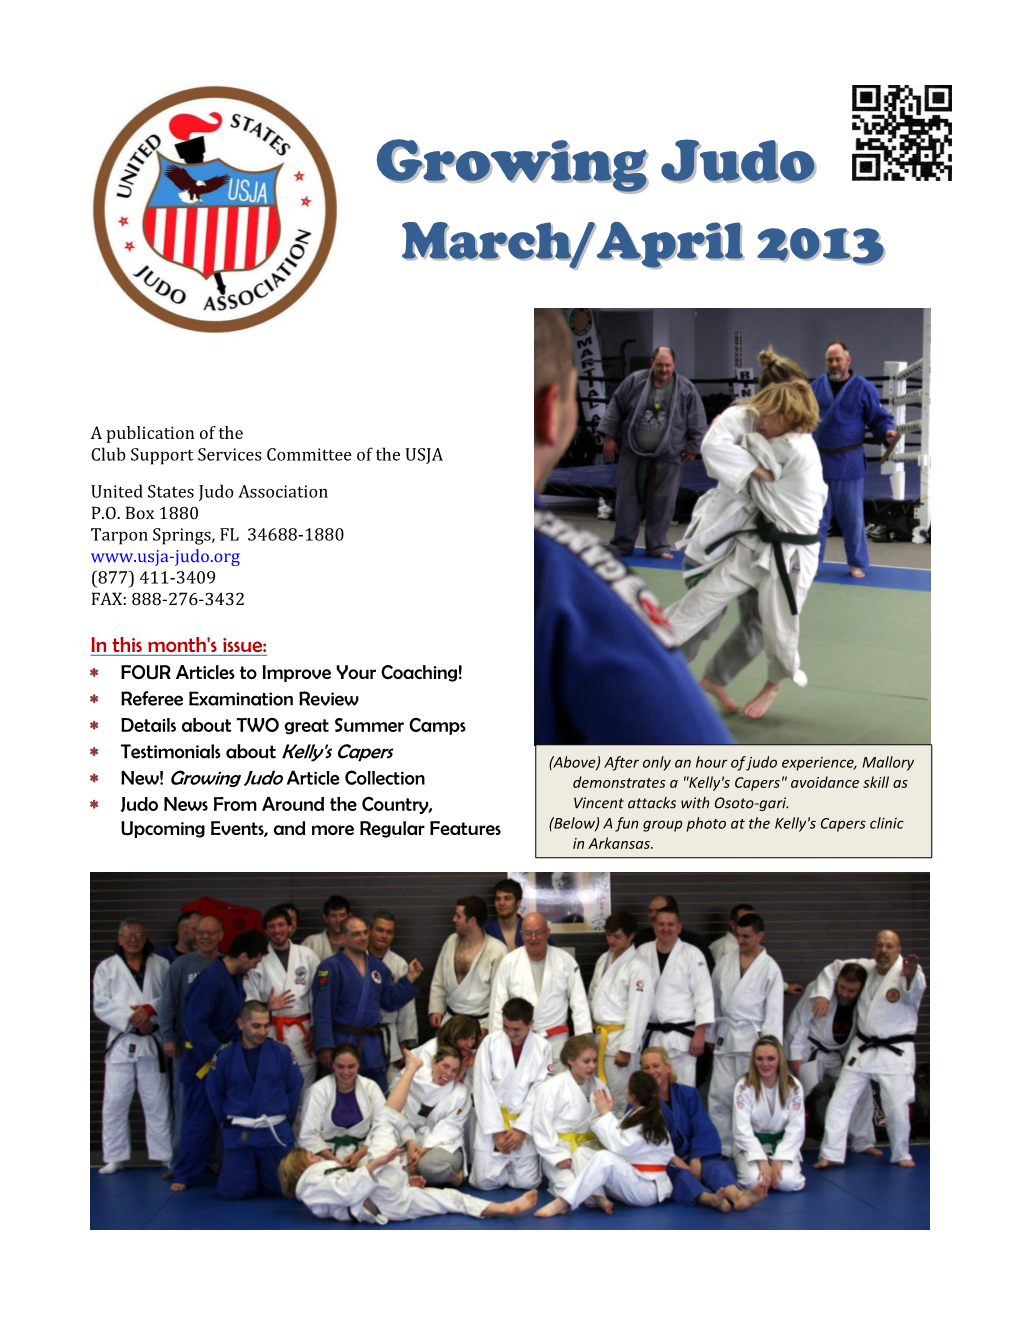 Growing Judo Article Collection Demonstrates a "Kelly's Capers" Avoidance Skill As  Judo News from Around the Country, Vincent Attacks with Osoto-Gari